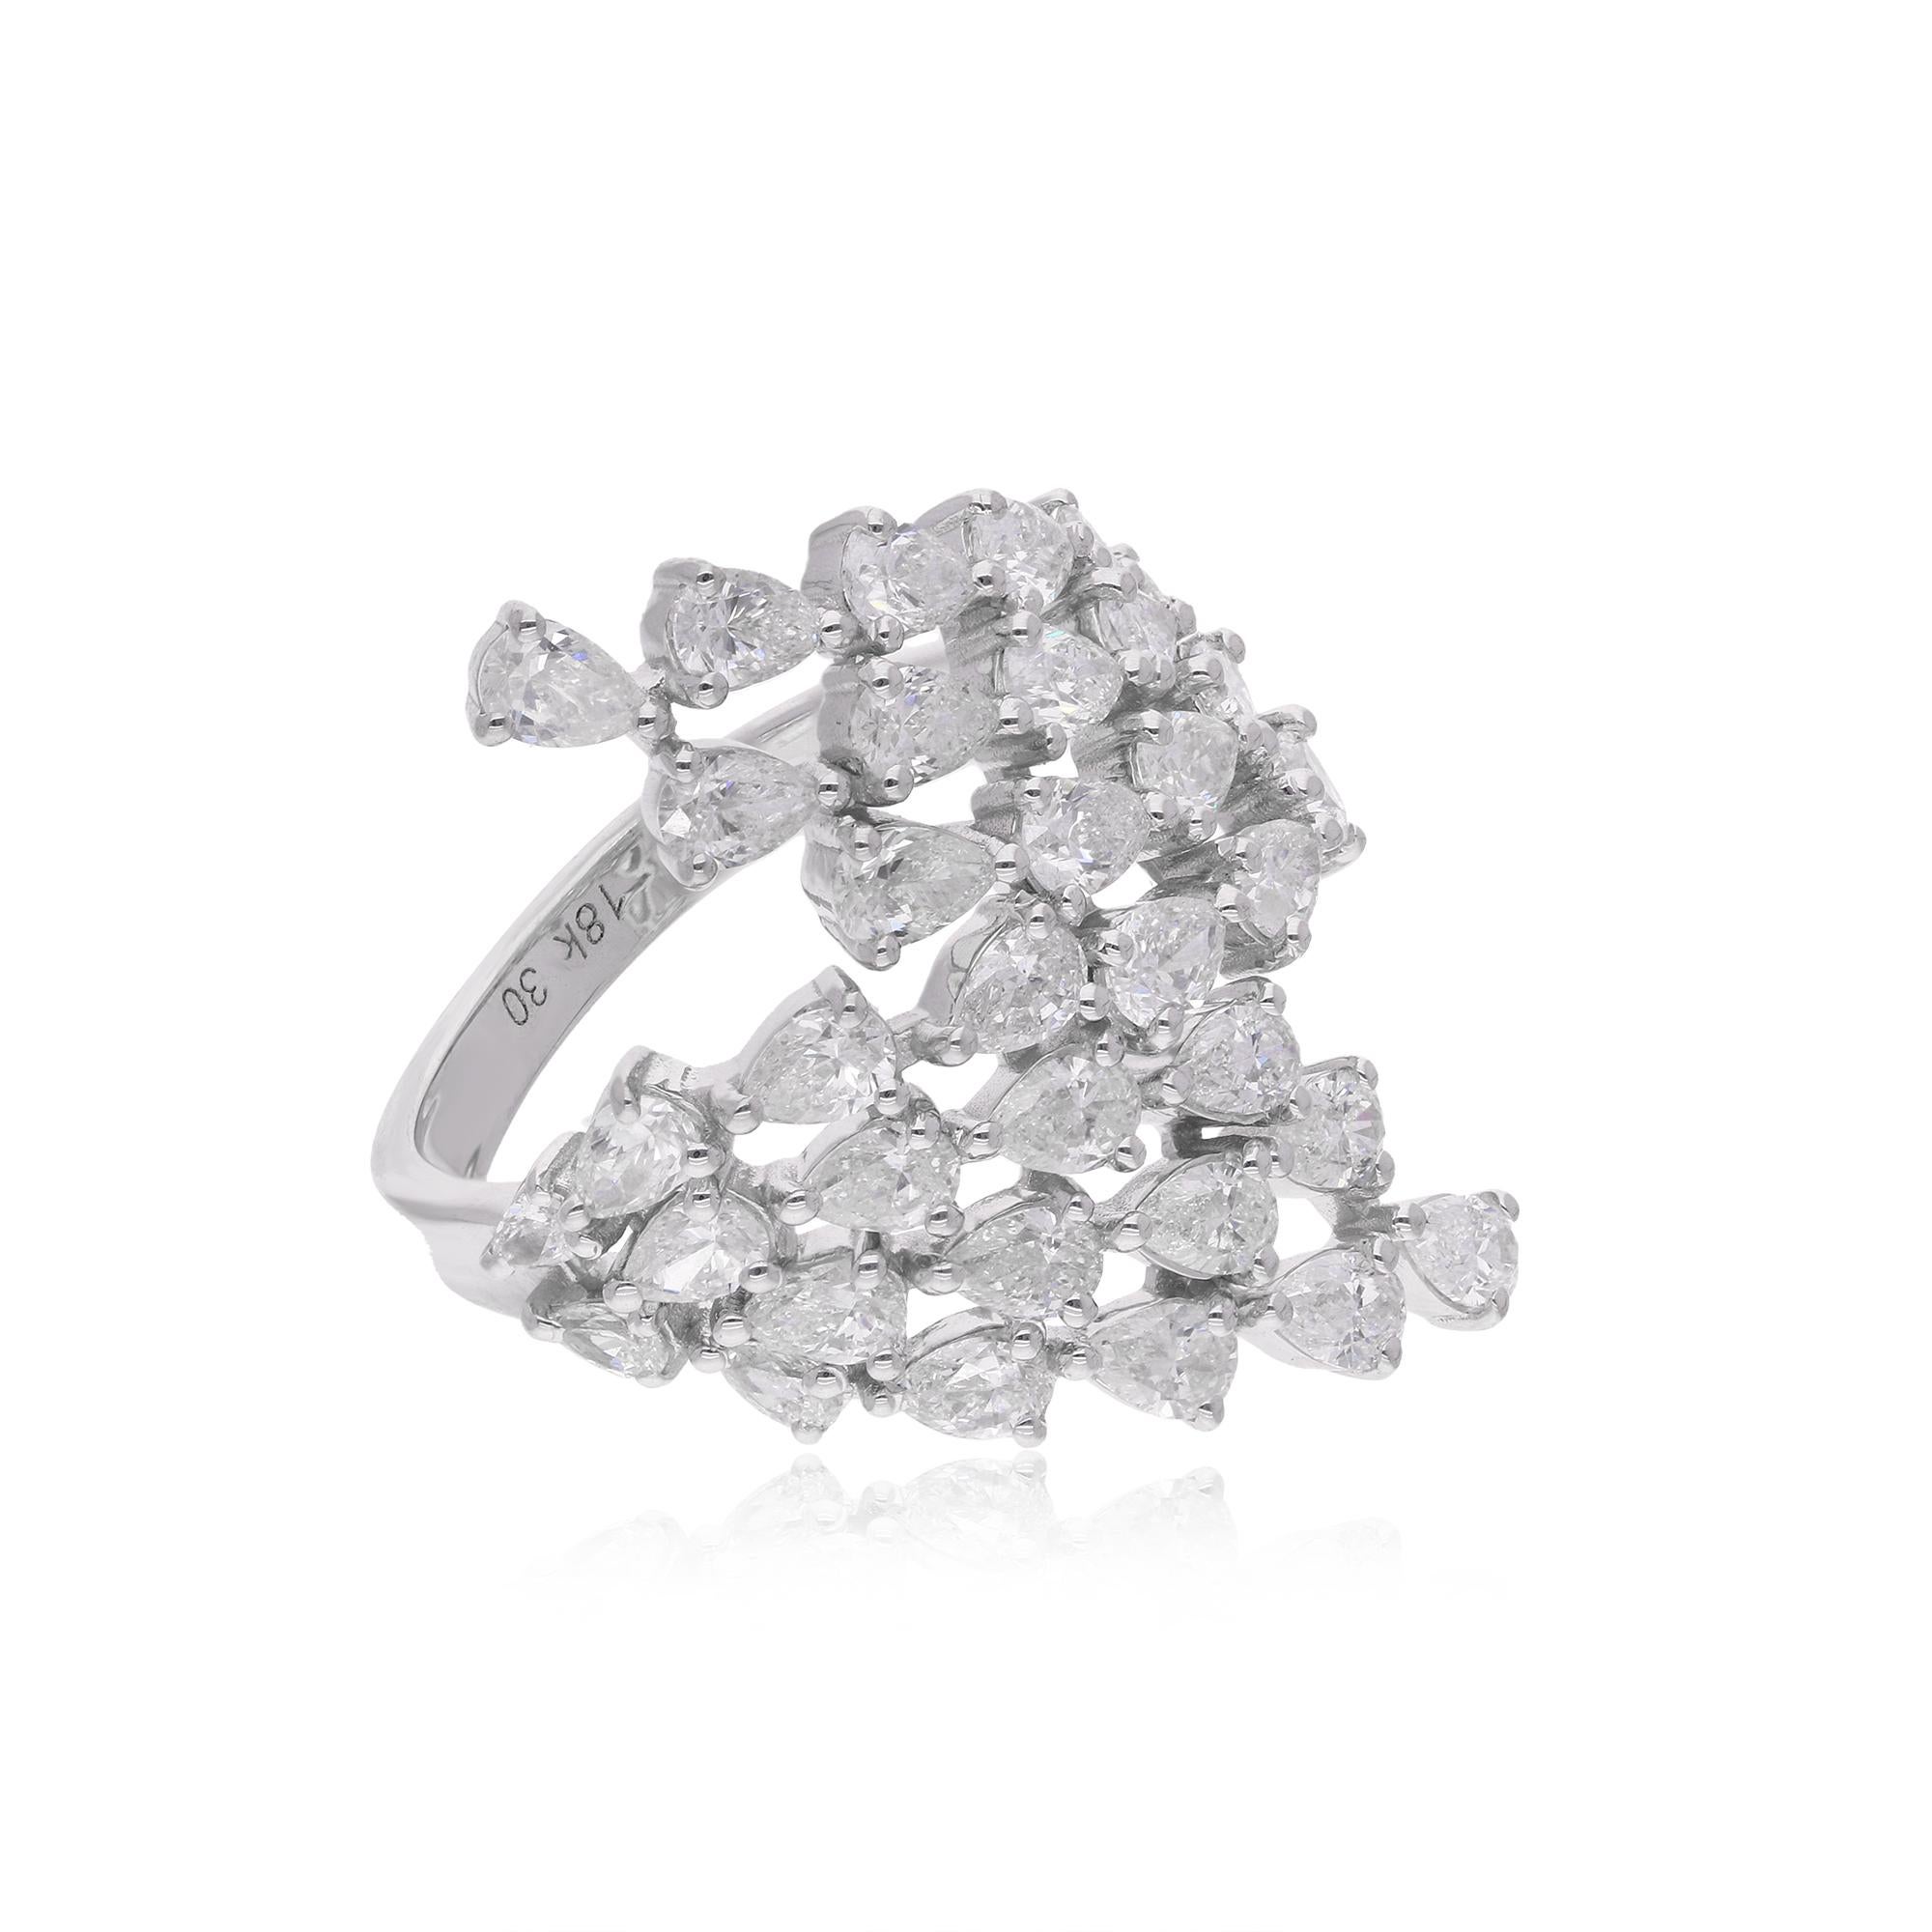 Crafted in solid 18k Gold, this ring features a cluster of sparkling diamonds, creating a truly dazzling effect. The diamonds are expertly set in a secure prong setting, ensuring that they stay in place and catch the light at every angle.

This is a